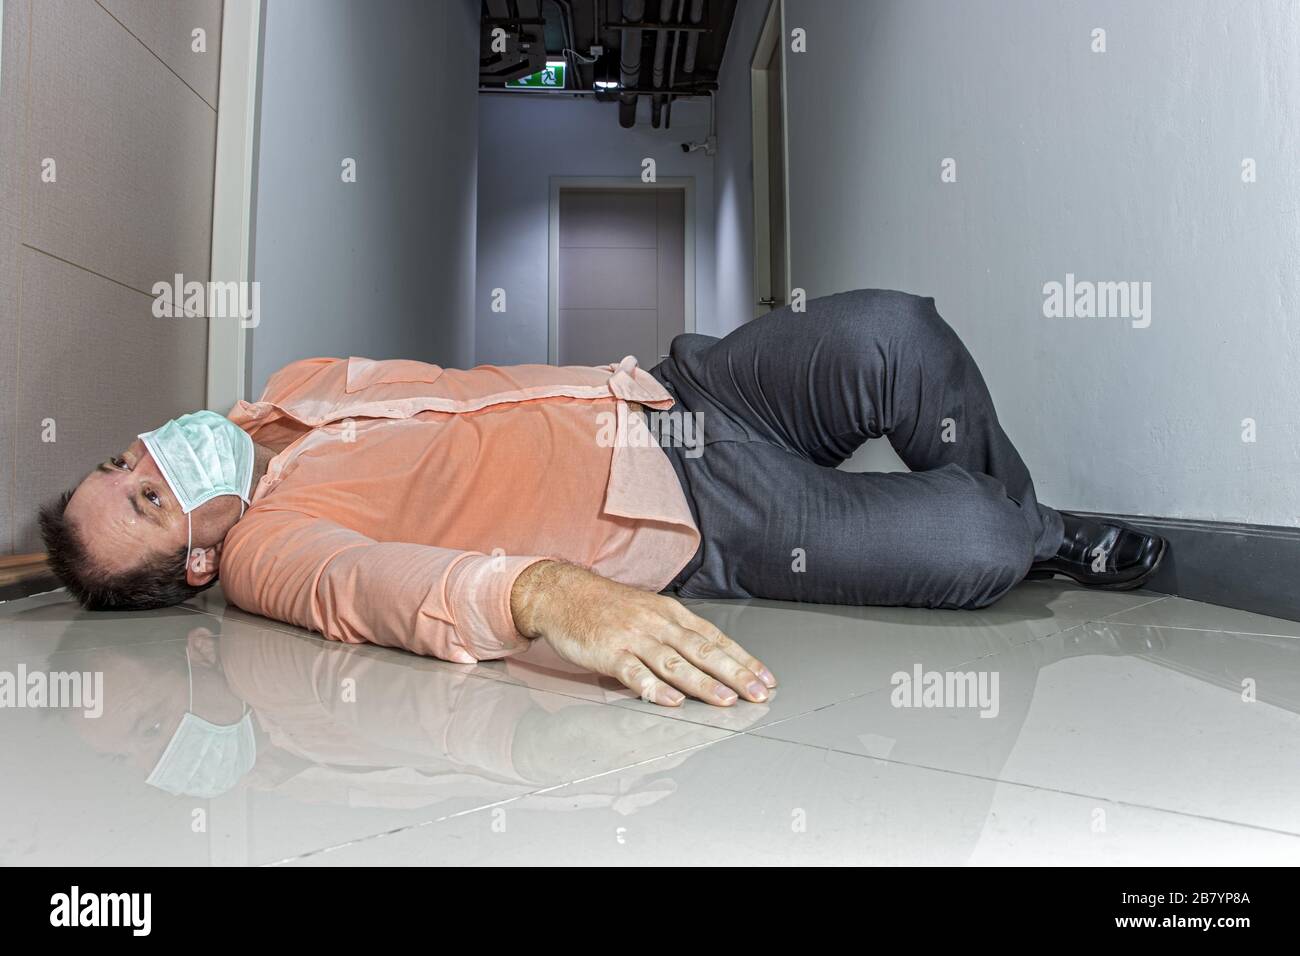 A Man With Protective Mask On Face Lying On Floor At Corridor Of